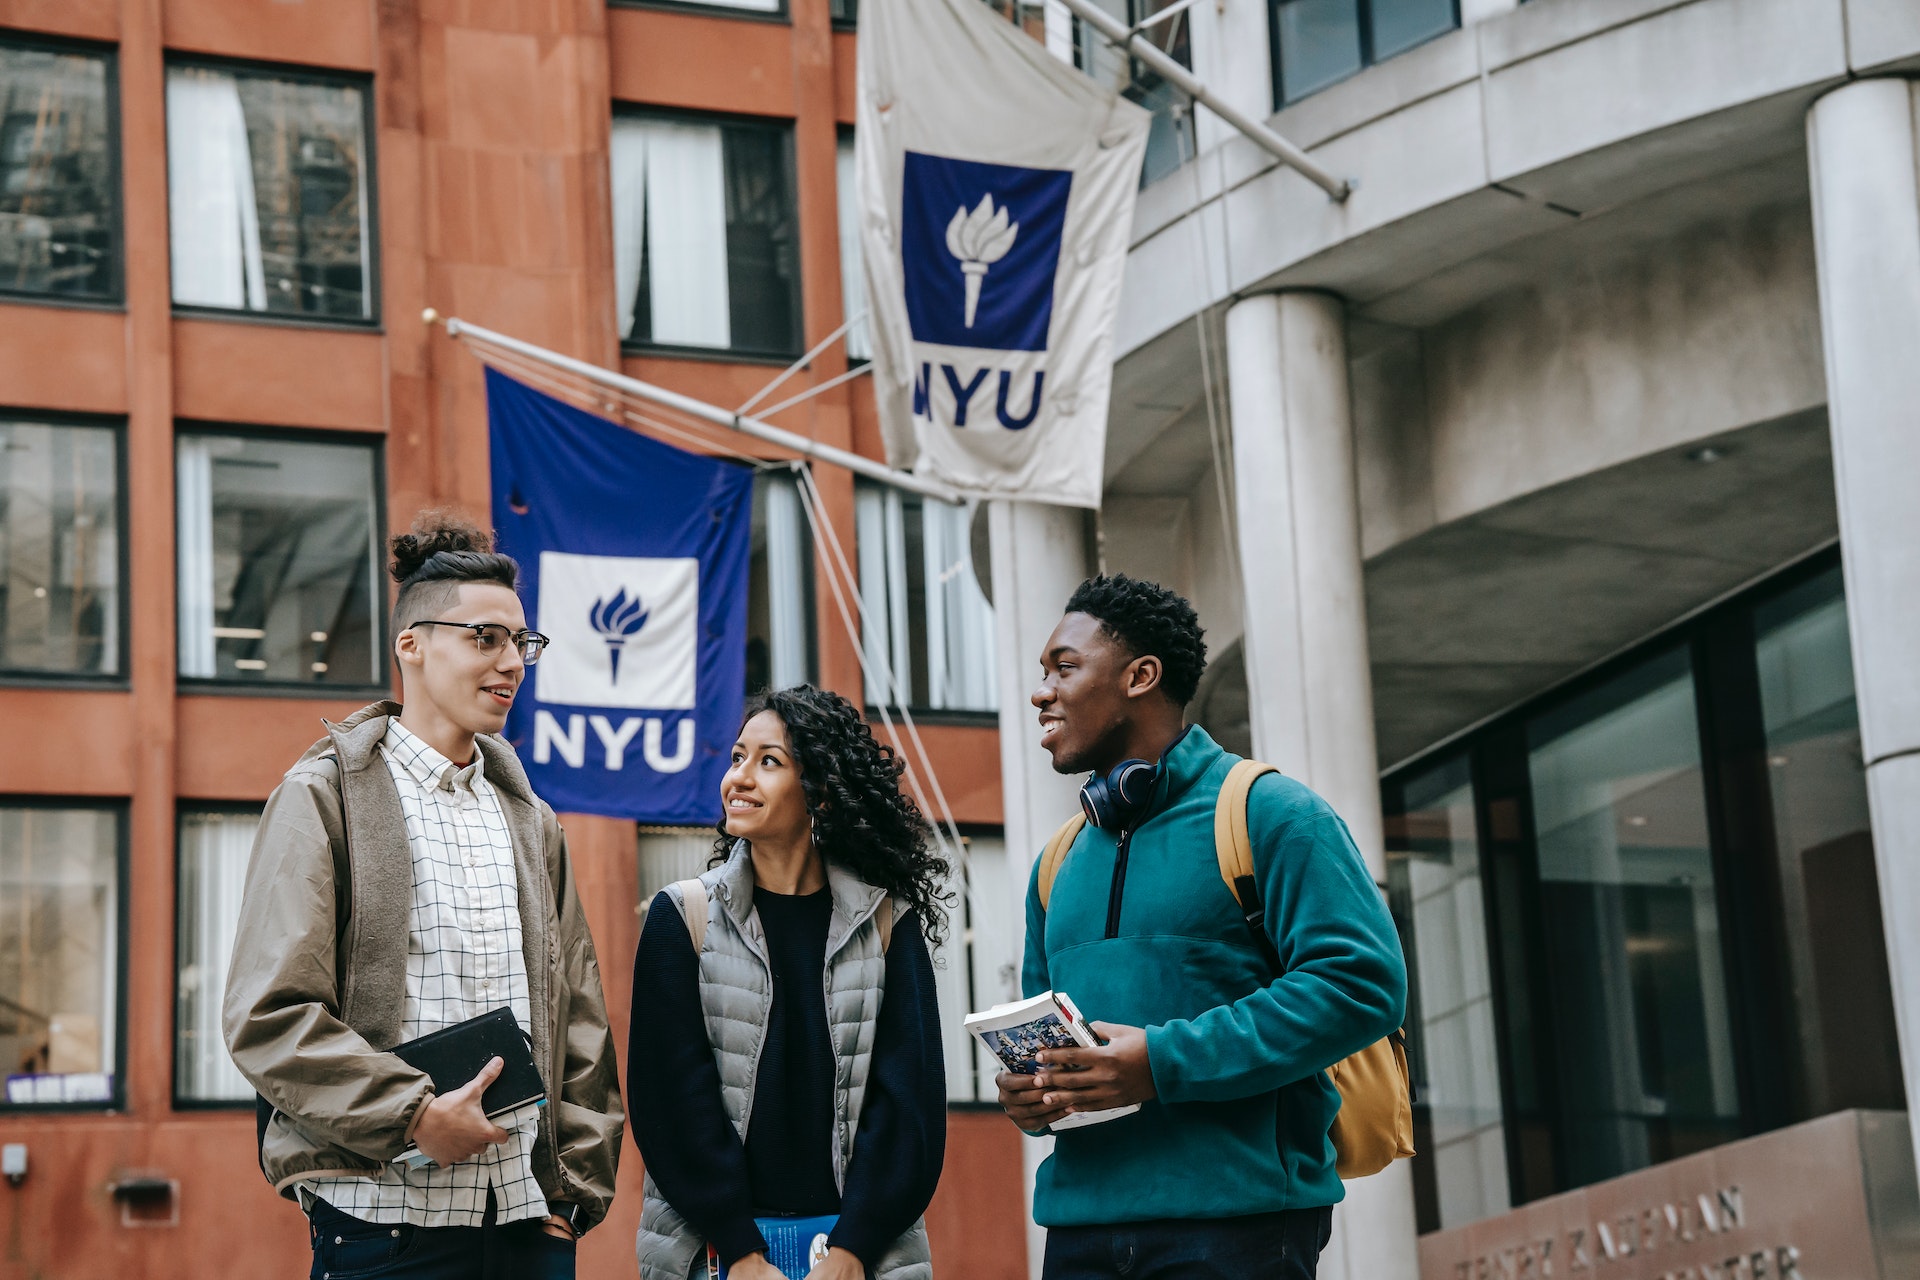 Alumni Engagement Ideas to Connect with New Grads